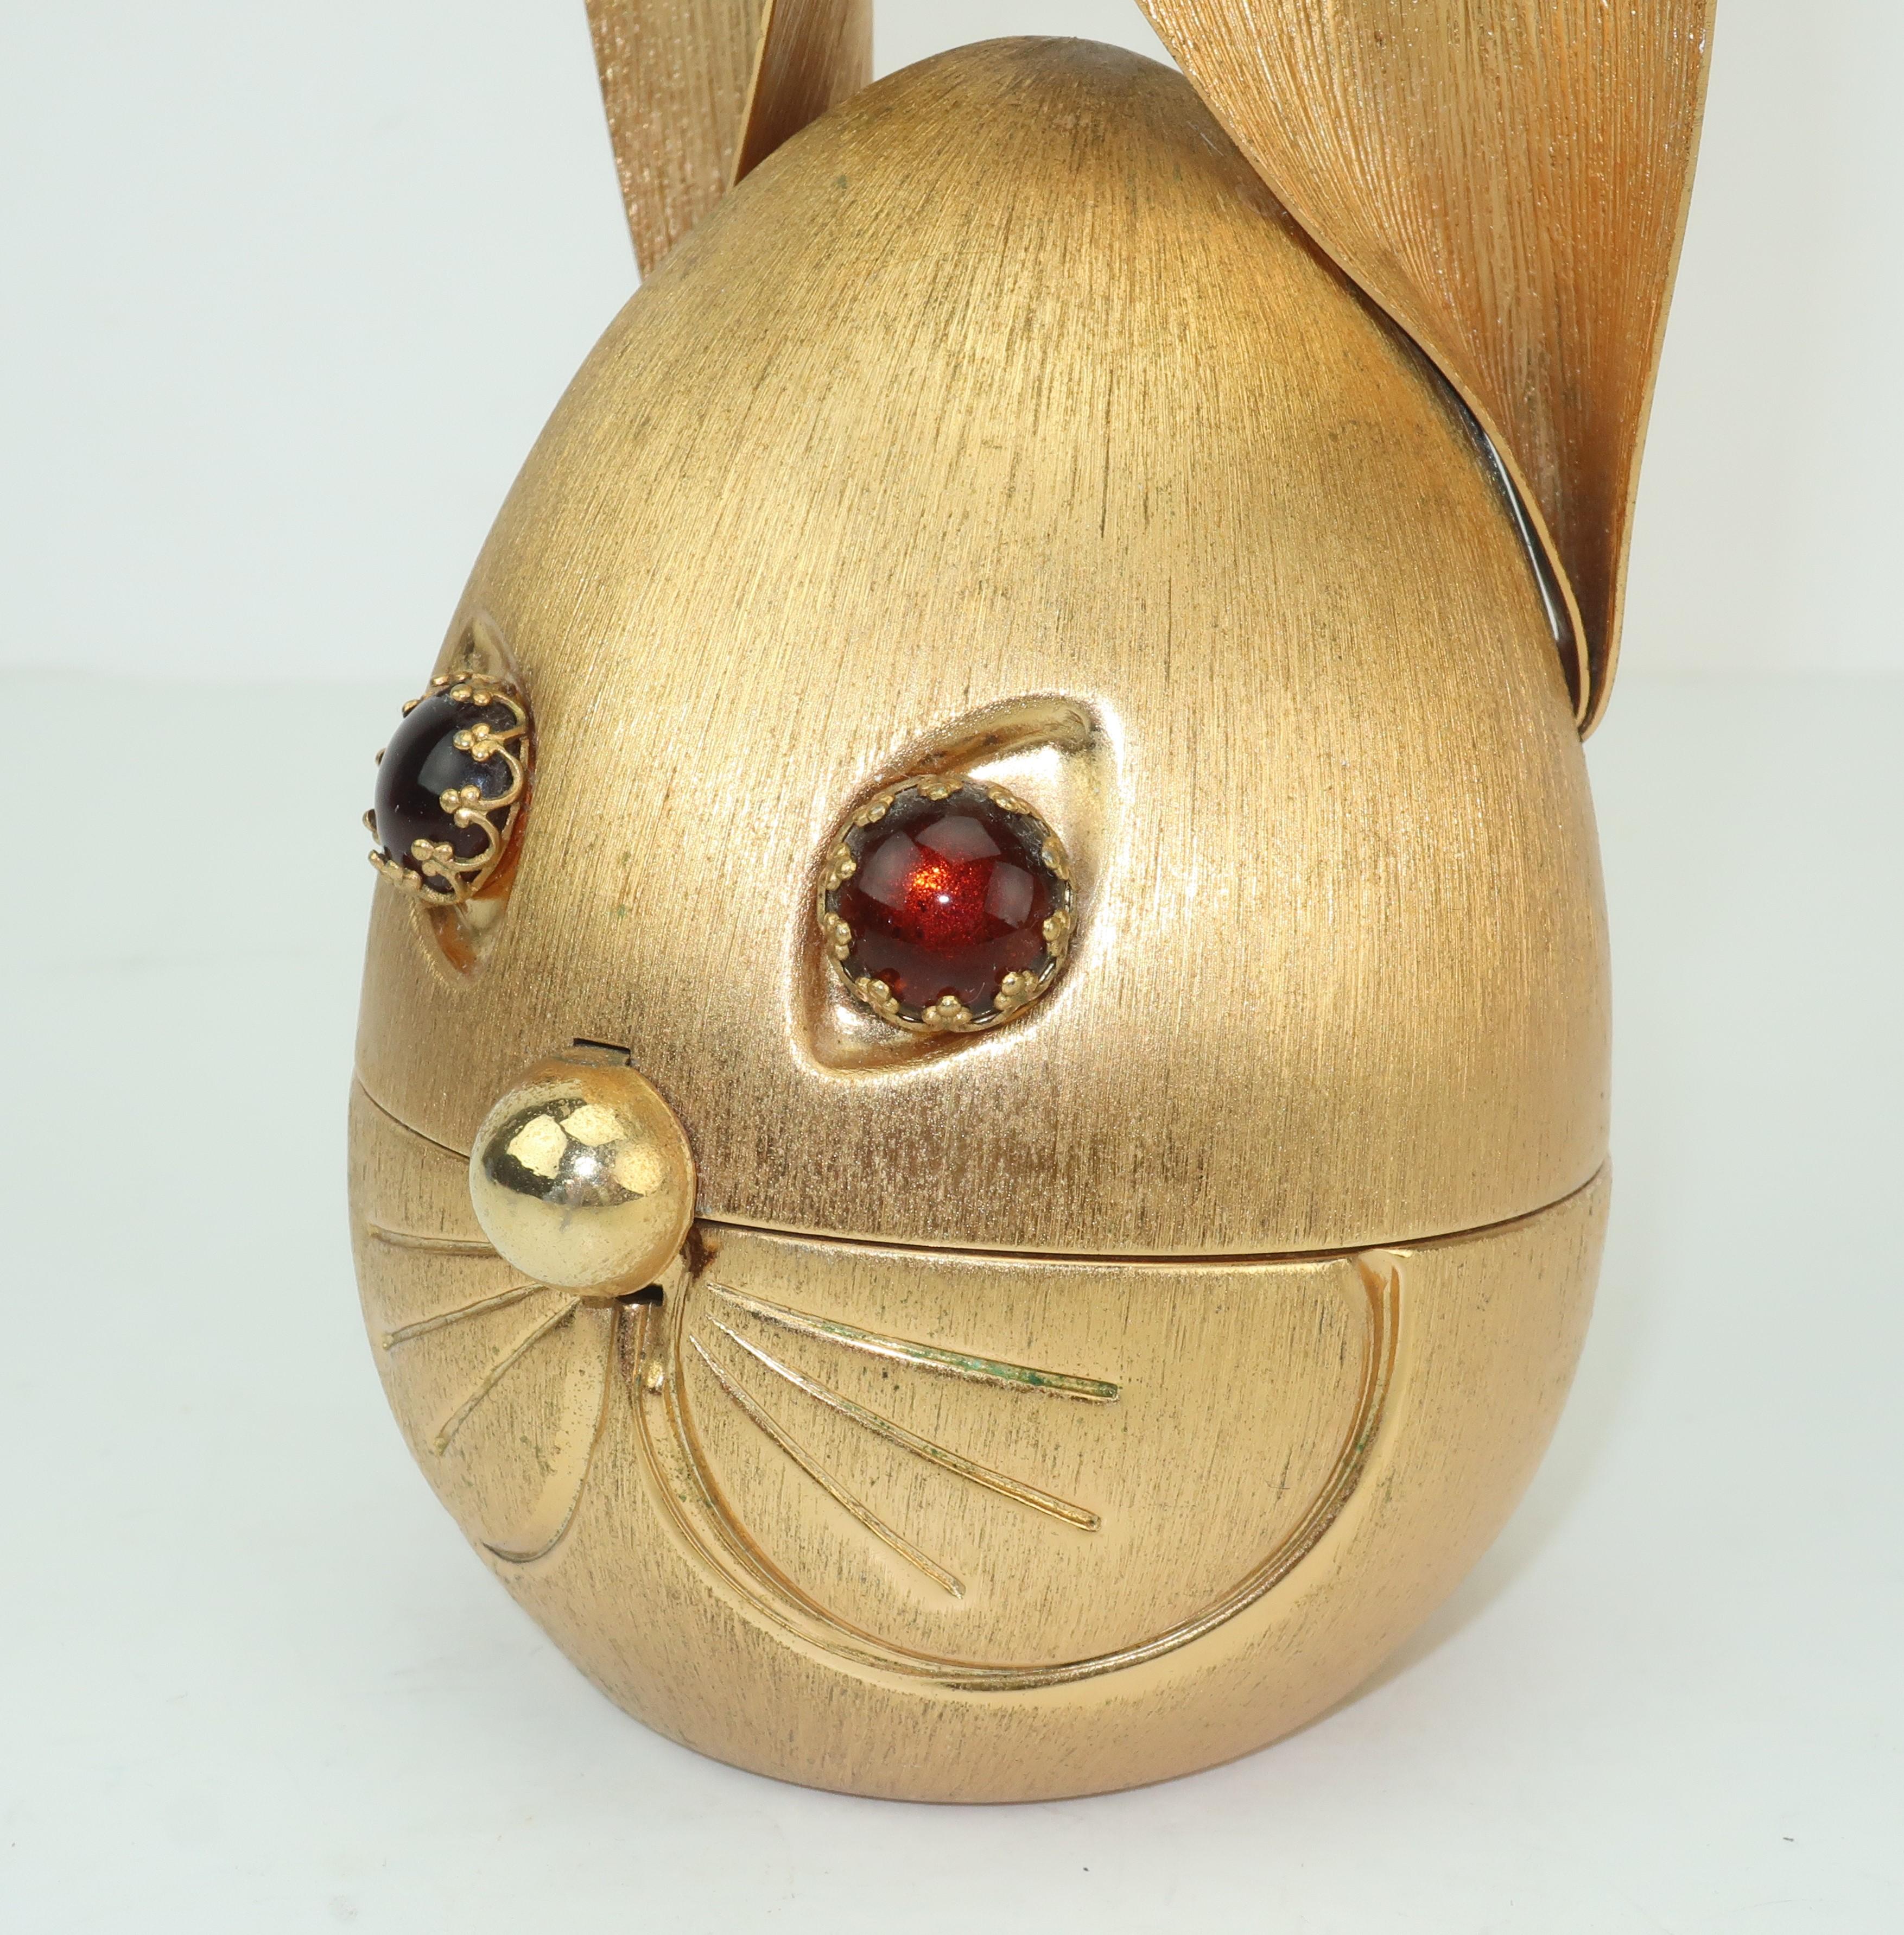 It's a bunny banker! This brushed gold tone rabbit bank by Napier is a great whimsical accessory for catching all your coins. His amber glass eyes and dome nose provide dimension and a bit of animation while the hidden screw in the back allows easy